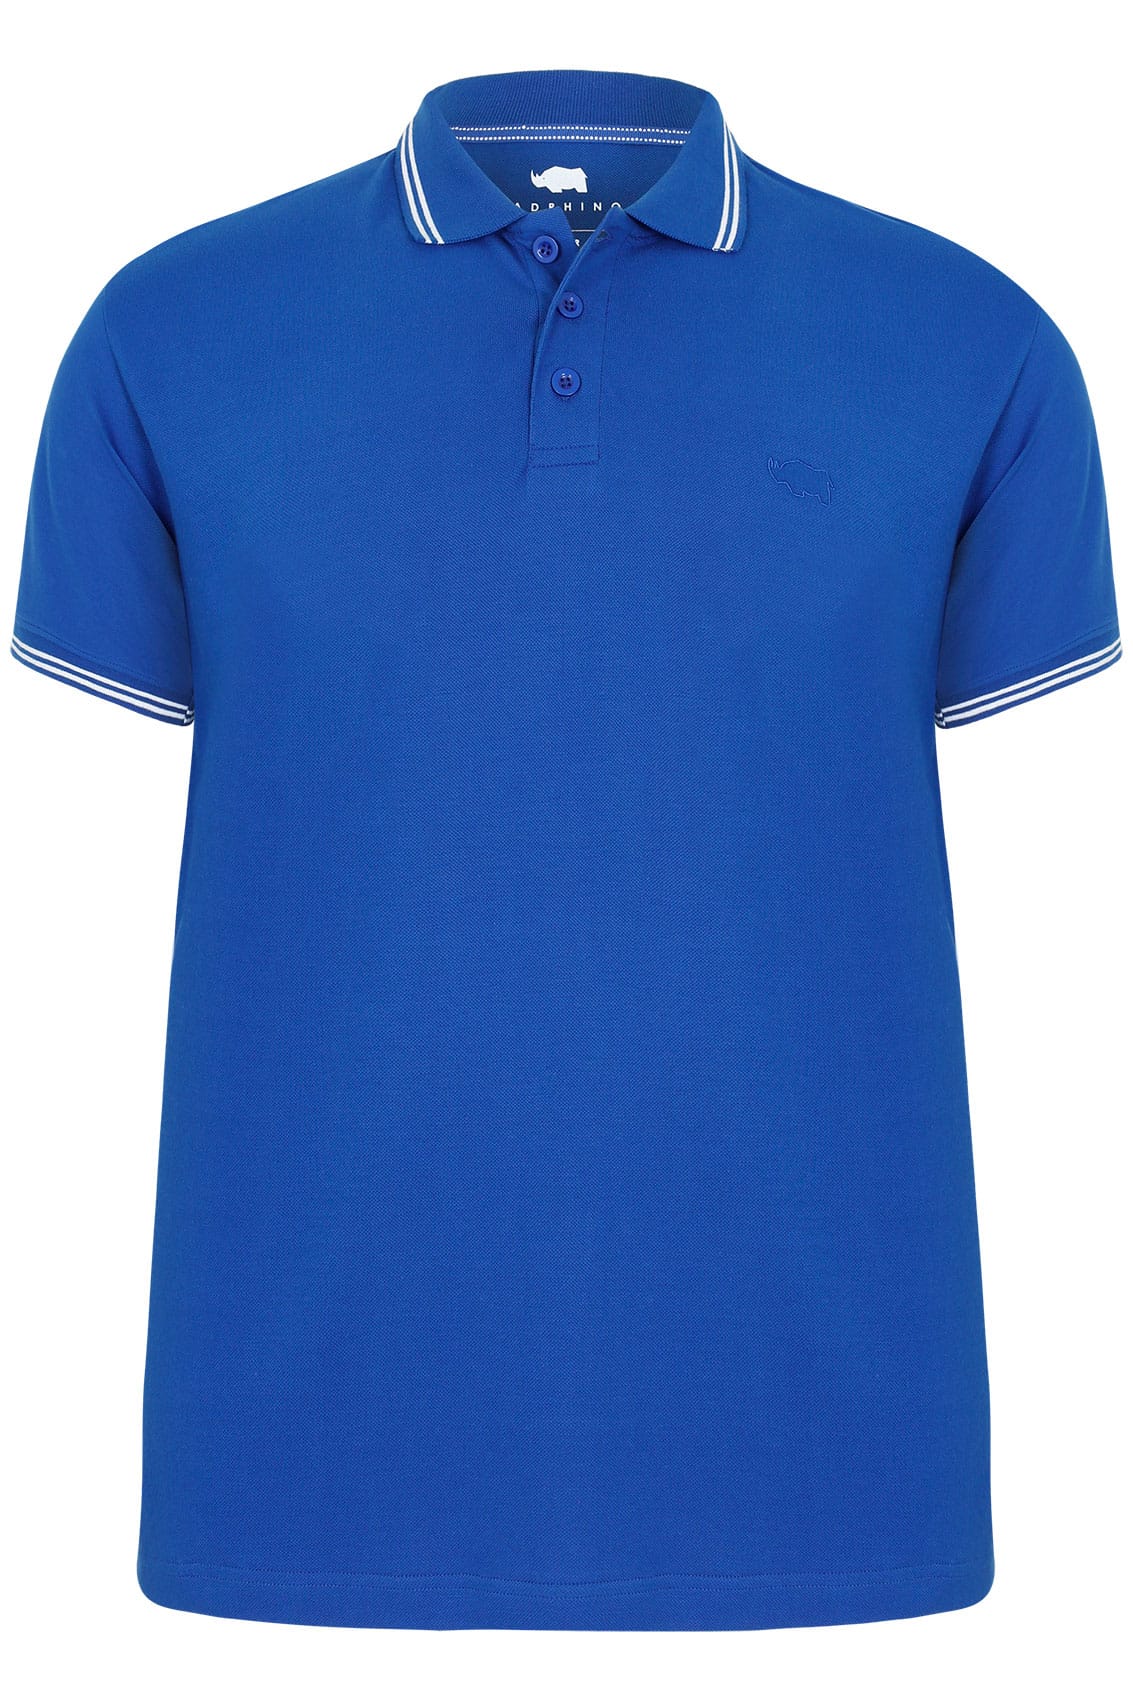 BadRhino Cobalt Blue Textured Tipped Polo Shirt, Size L to 8XL